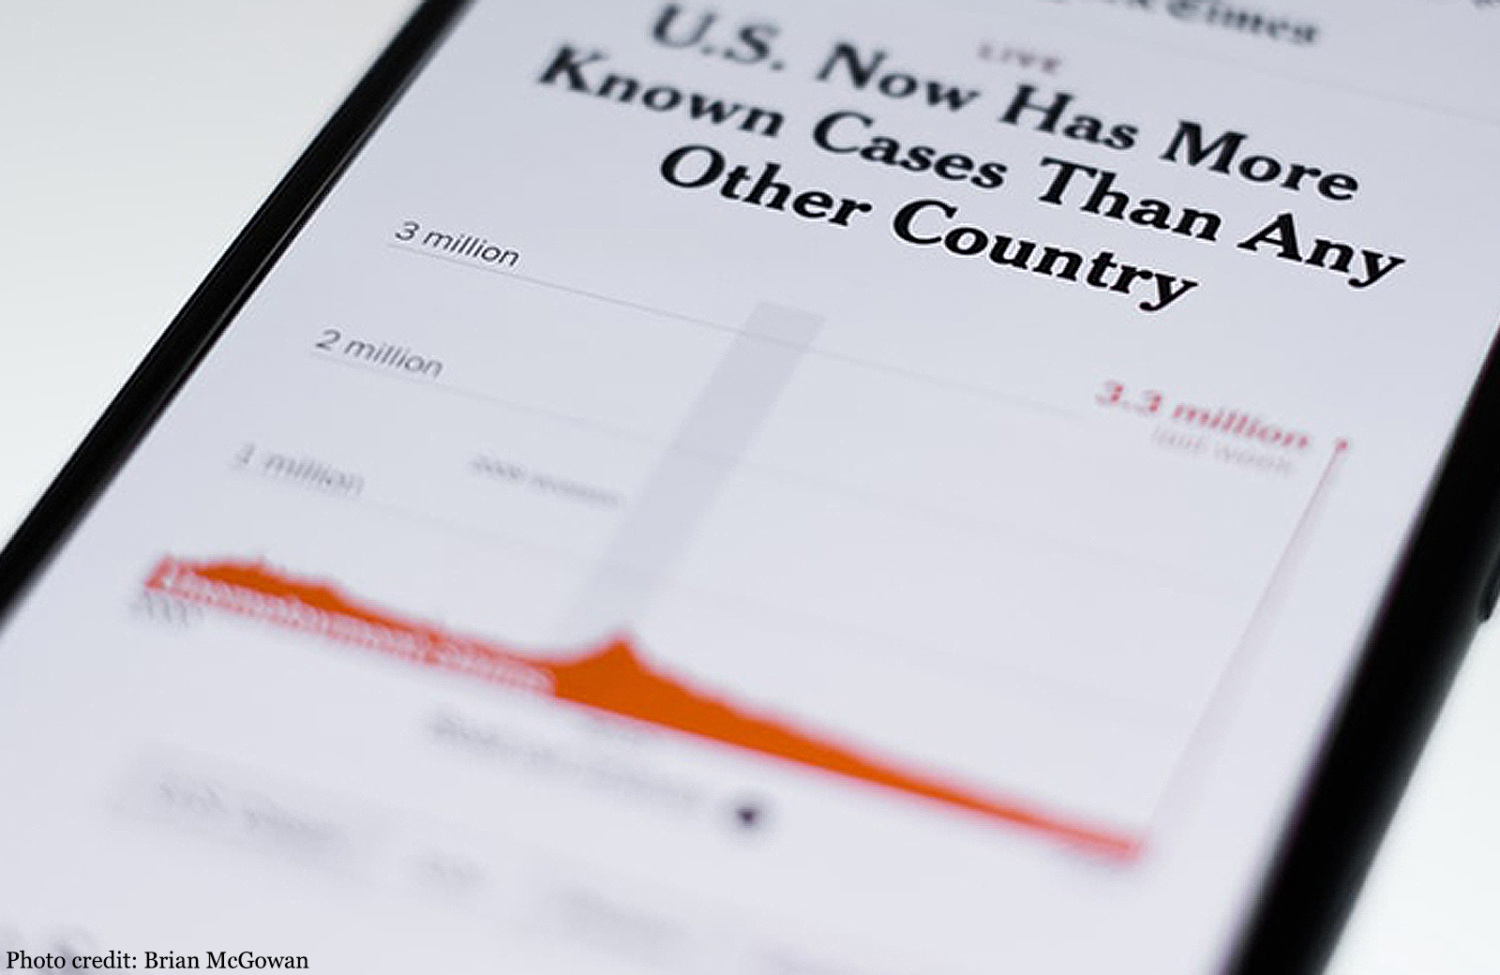 phone showing "U.S. Now Has More Known Cases Than Any Other Country"